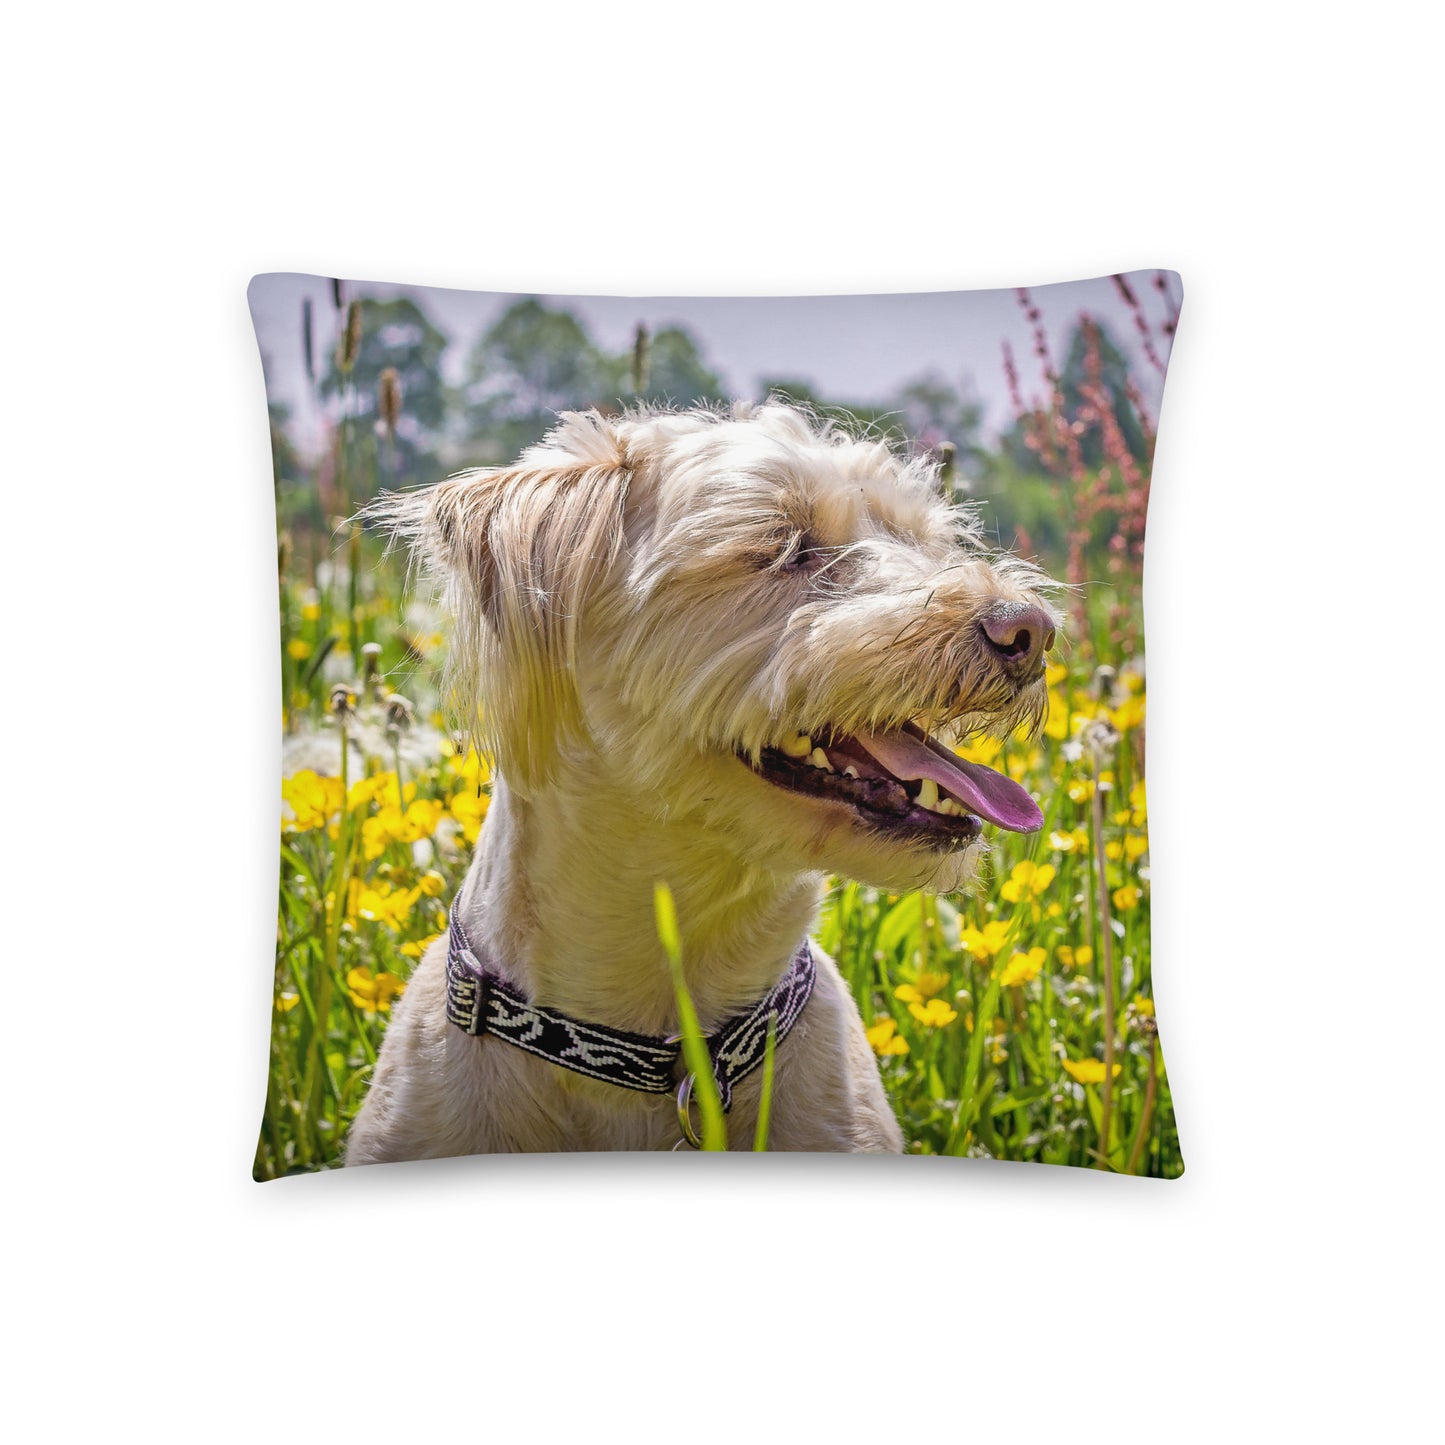 A Soft Throw Pillow Printed with a Dog in a Field of Wild Flowers